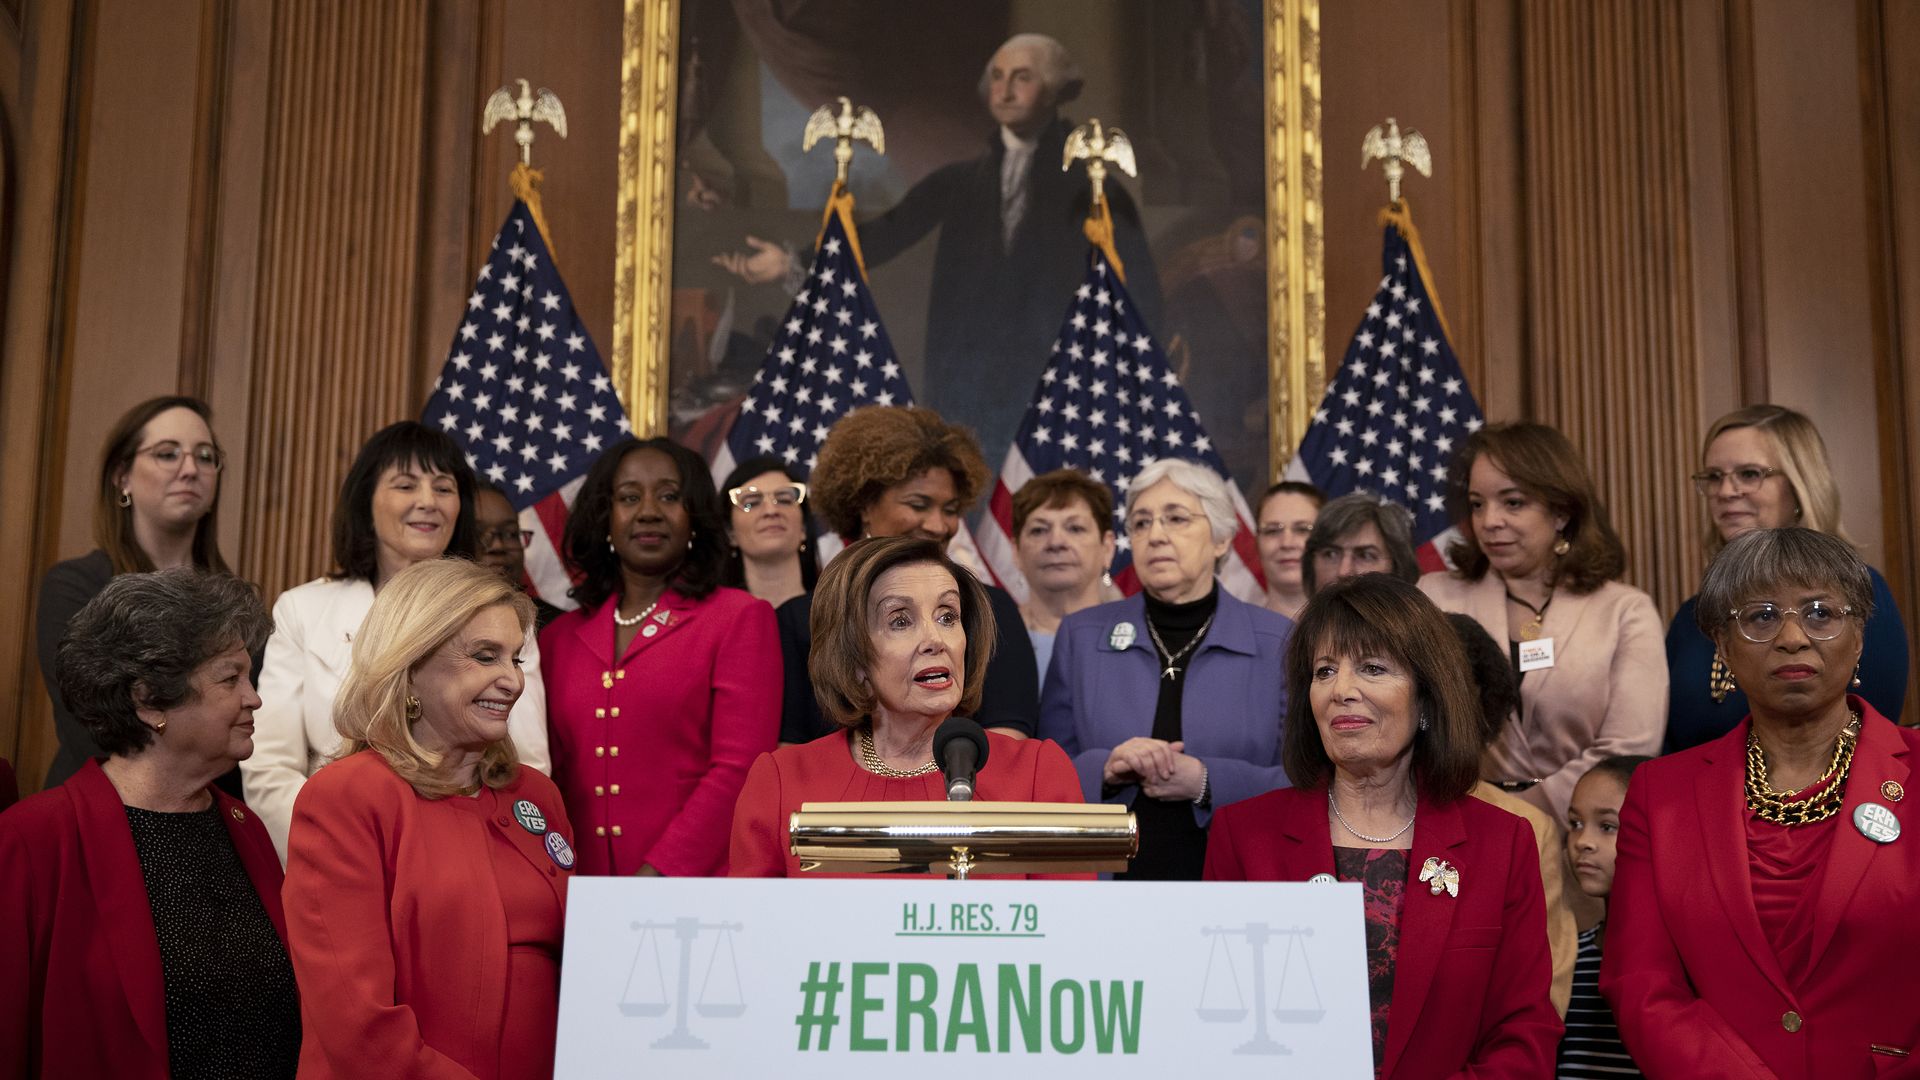 Pelosi stands with other House Democrats wearing red